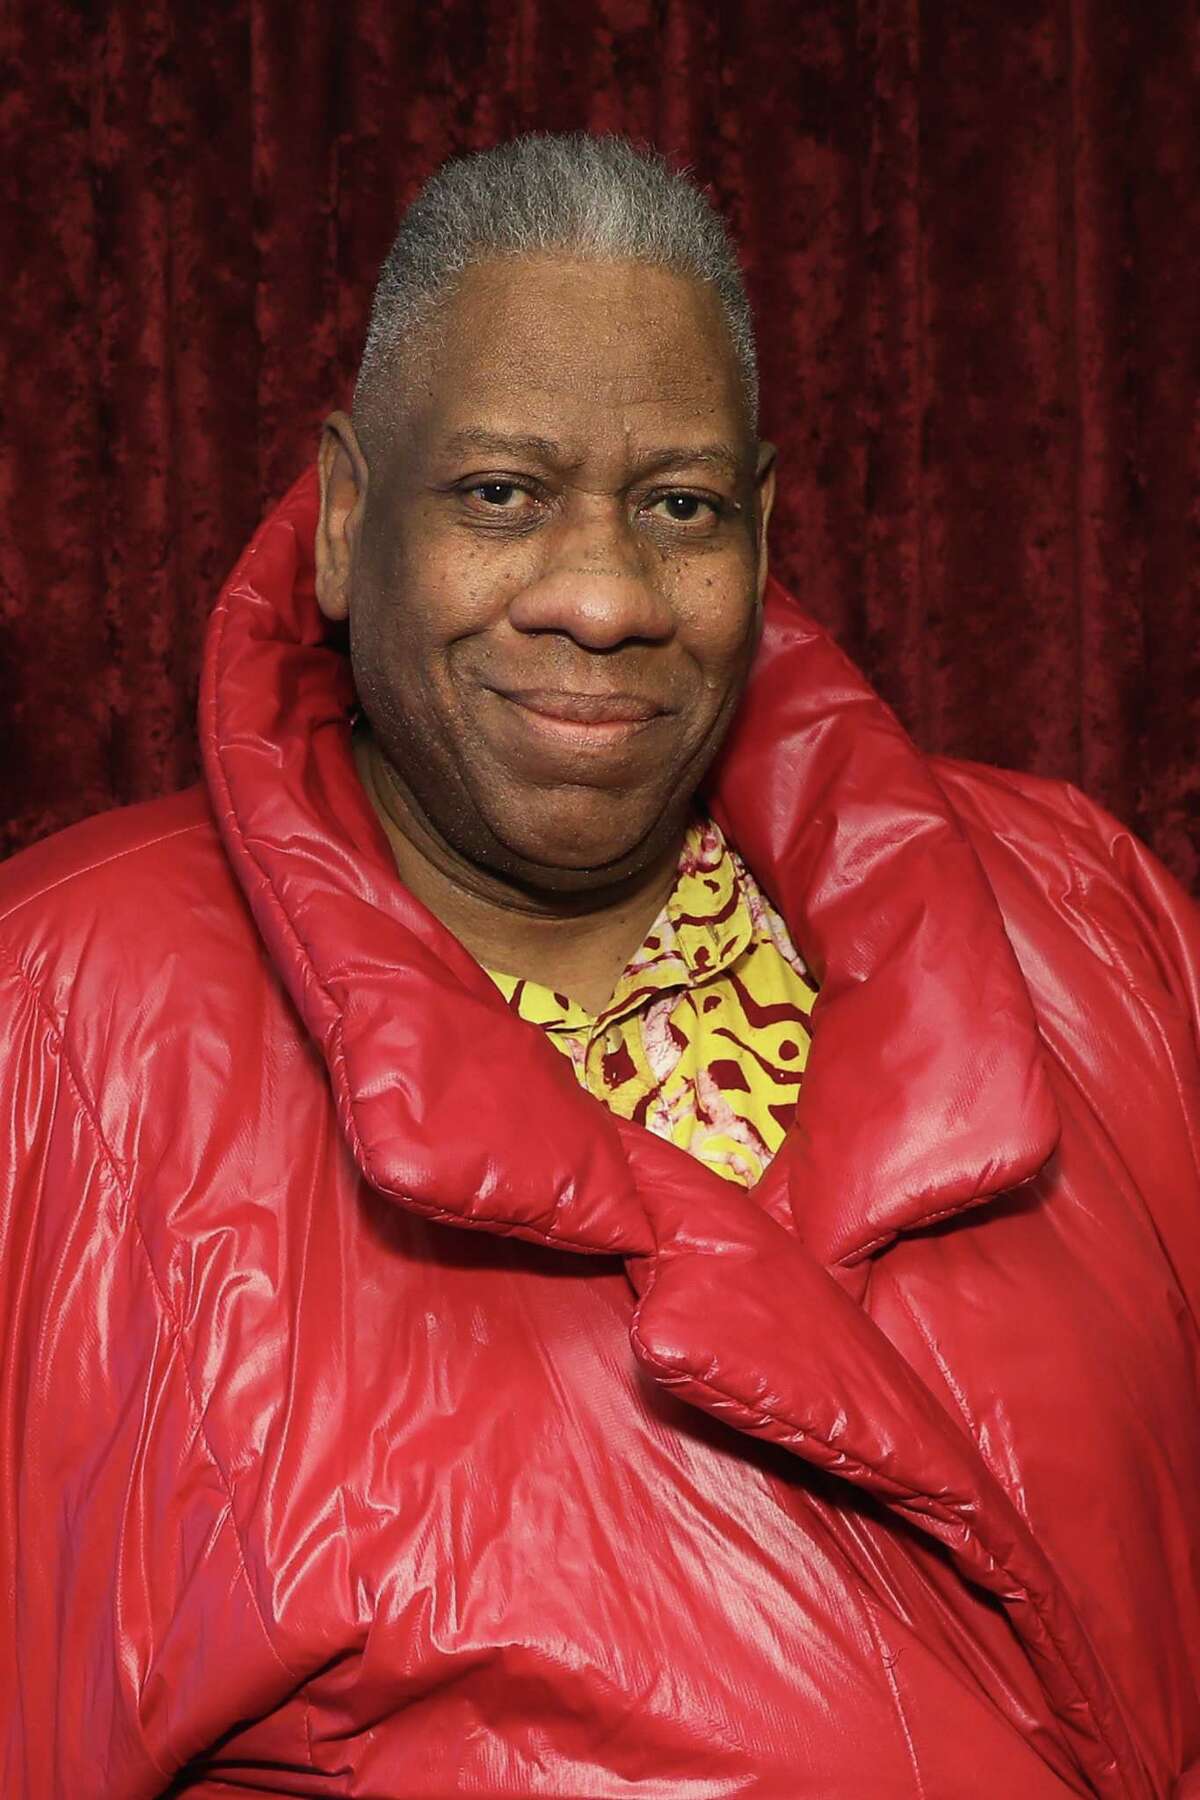 FILE - JANUARY 18: Fashion journalist and former creative director and American editor-at-large of Vogue magazine Andre Leon Talley has died. He was 73 years old. NEW YORK, NY - MARCH 29: Andre Leon Talley launches a new SiriusXM show on Andy Cohen's exclusive SiriusXM Channel Radio Andy at SiriusXM Studios on March 29, 2017 in New York City. (Photo by Cindy Ord/Getty Images for SiriusXM)